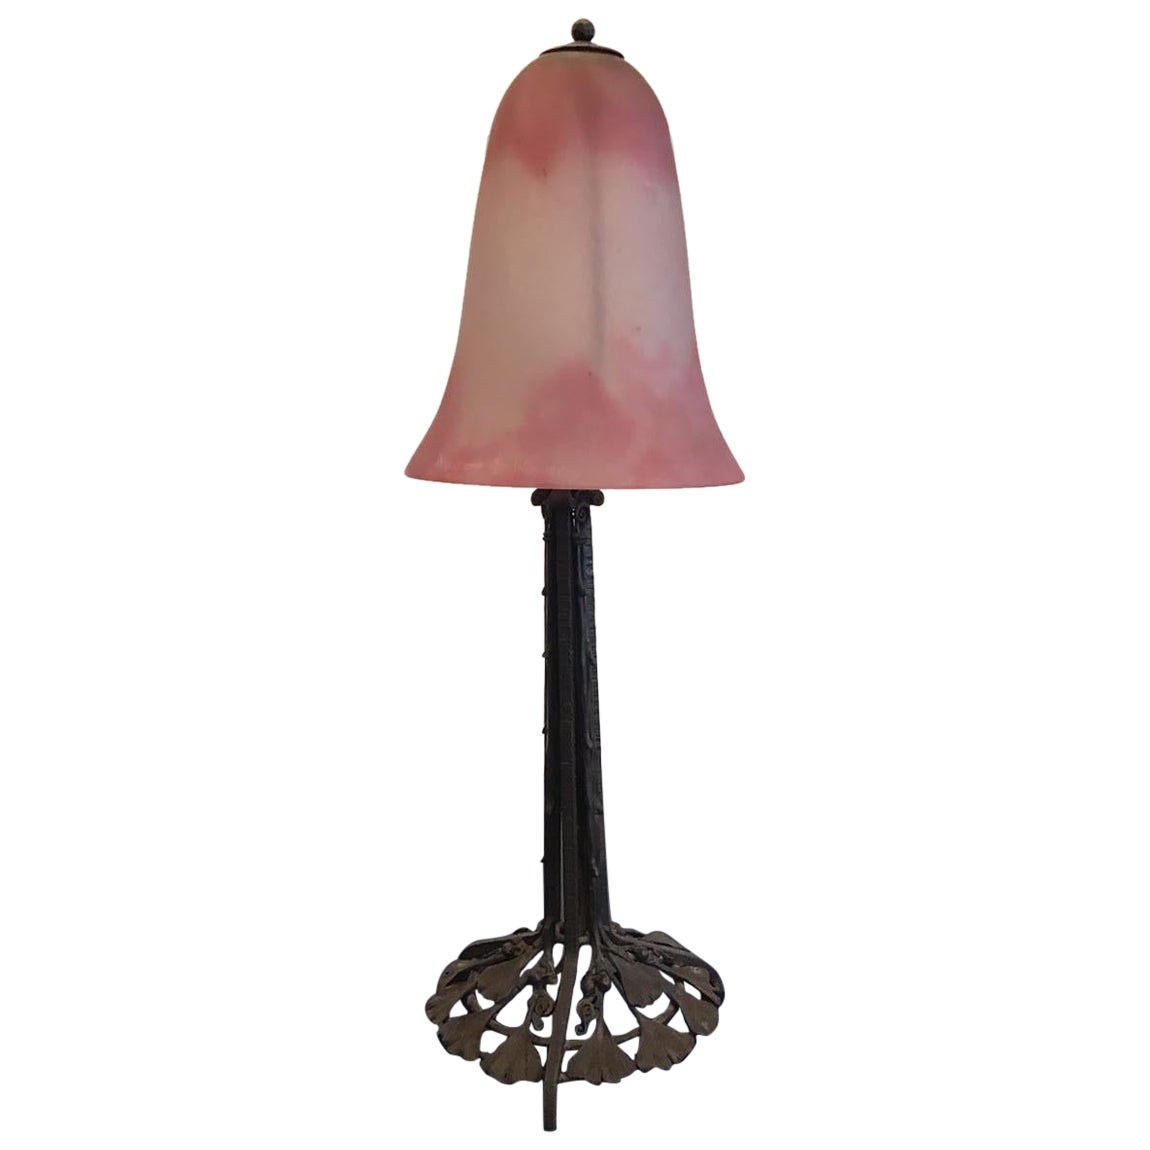 Daum Nancy Table Lamp Blown Glass Wrought Iron 1910 France For Sale